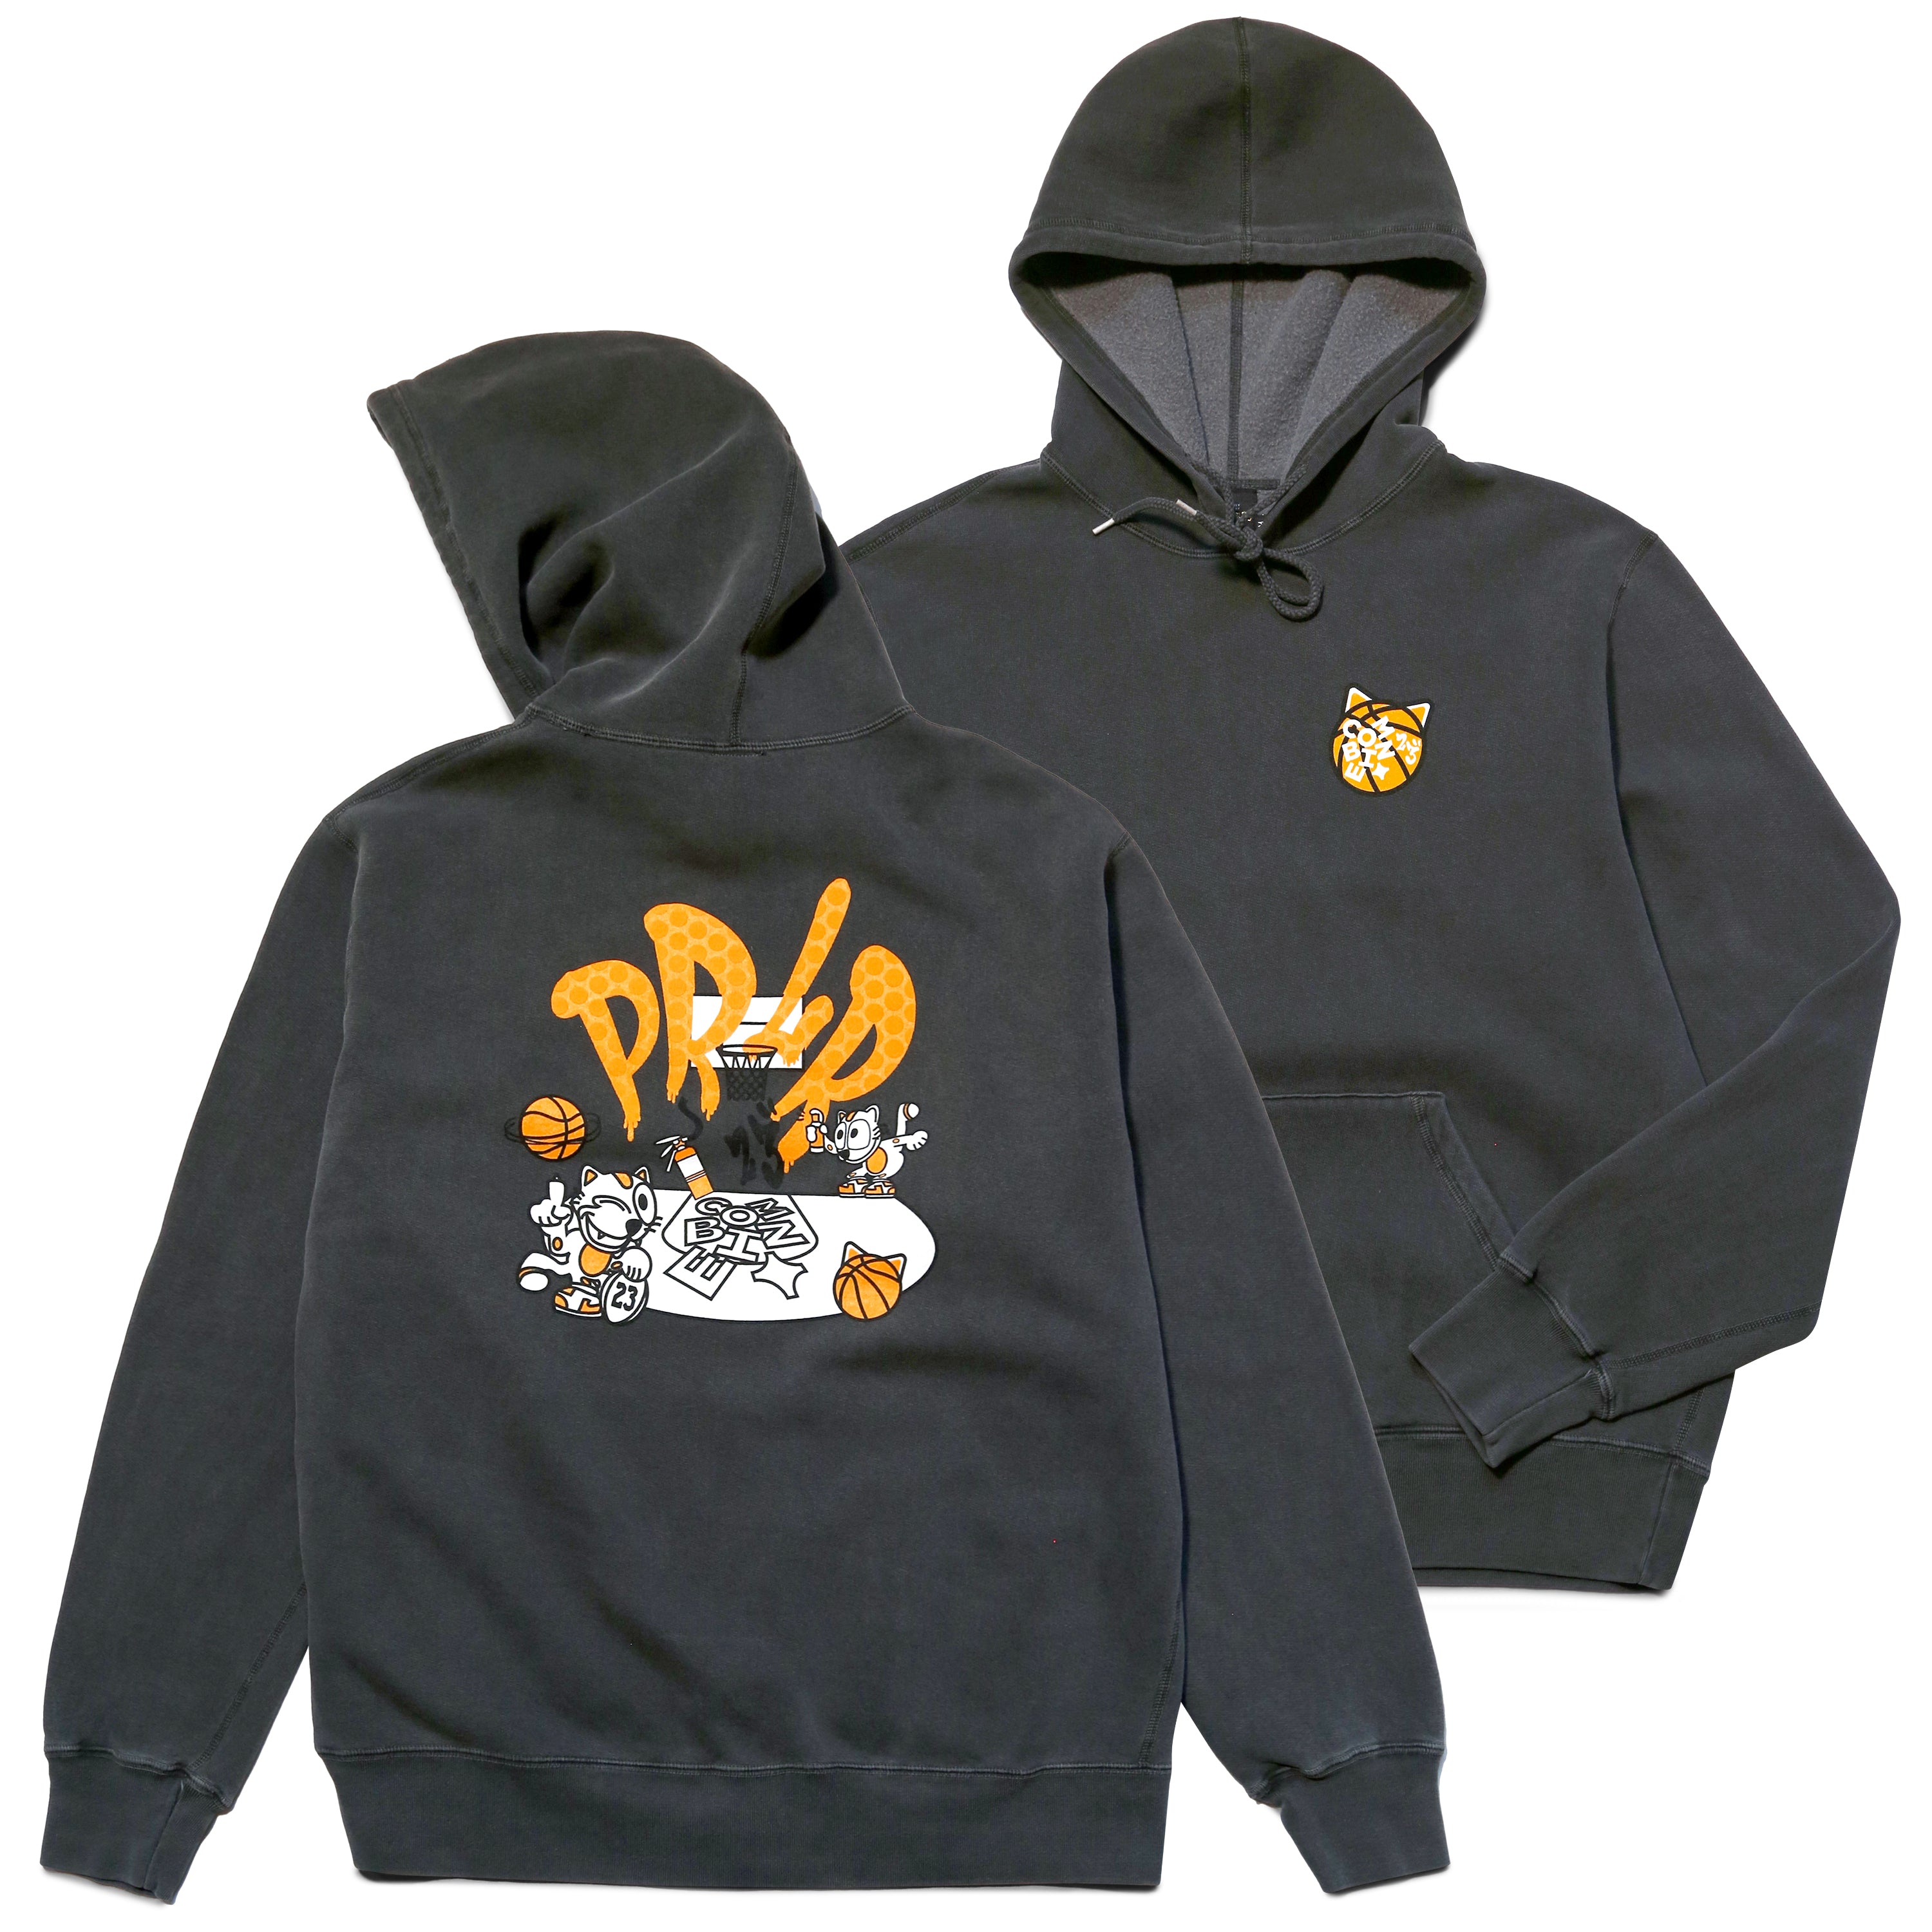 Parlor 23 x Combine "Shoot Out" Made in Canada Hoodie